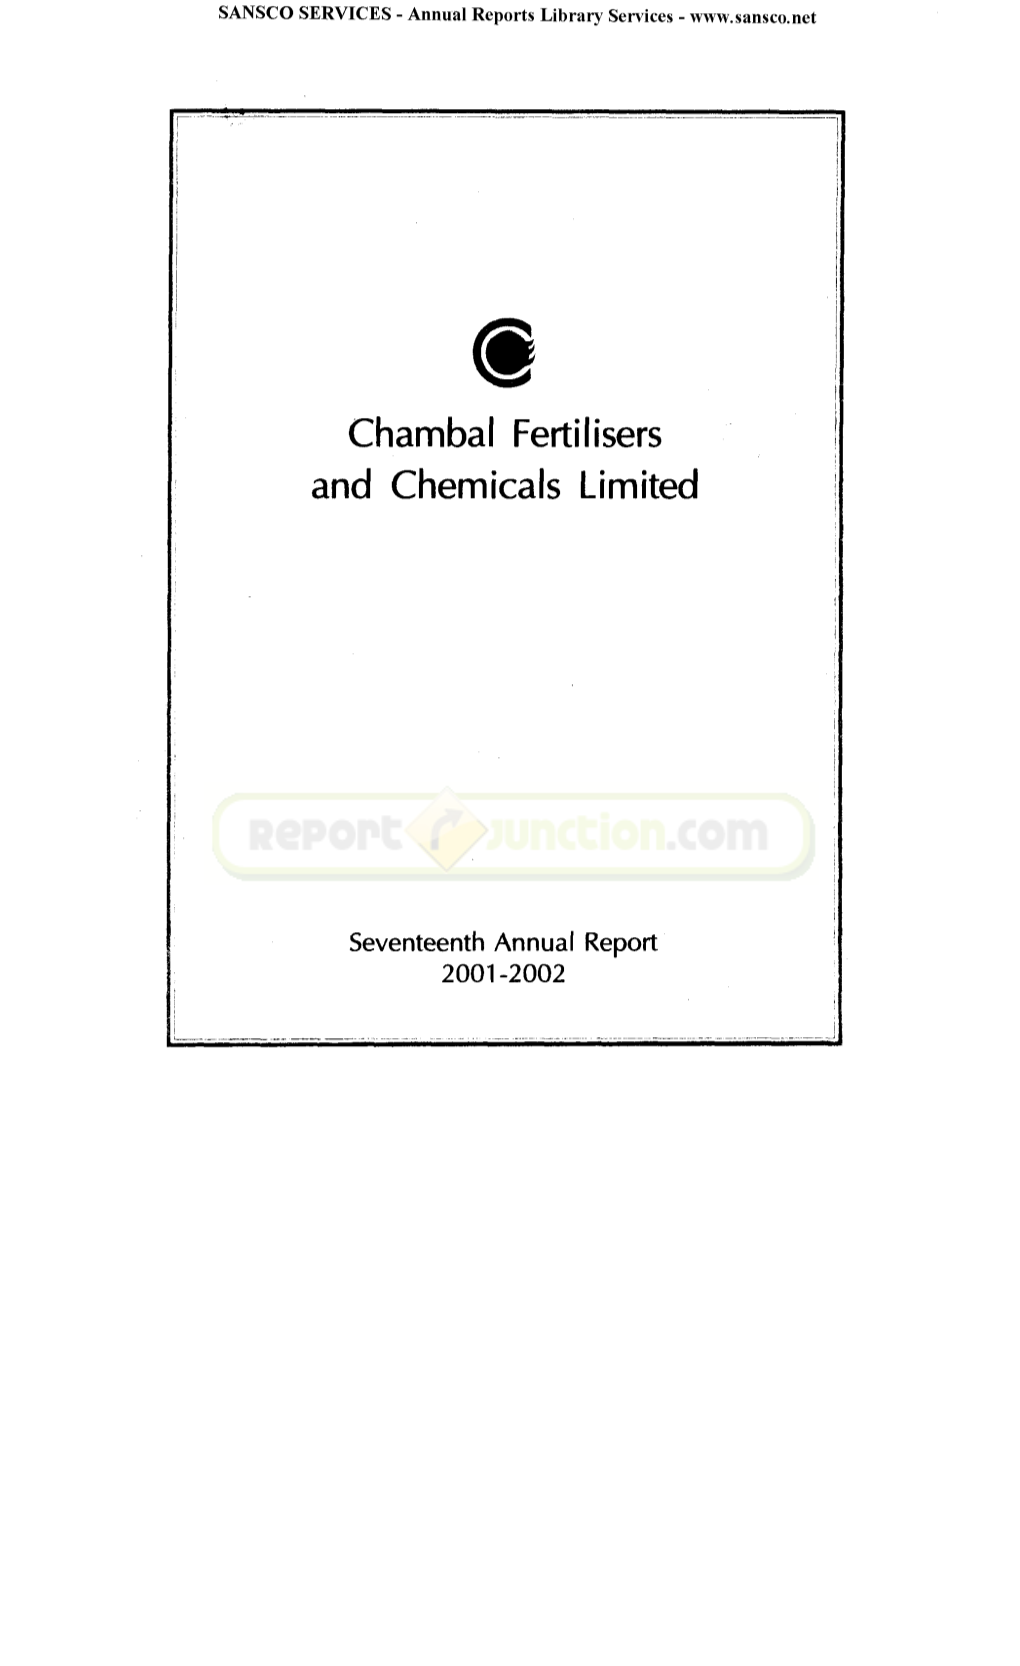 Chambal Fertilisers and Chemicals Limited